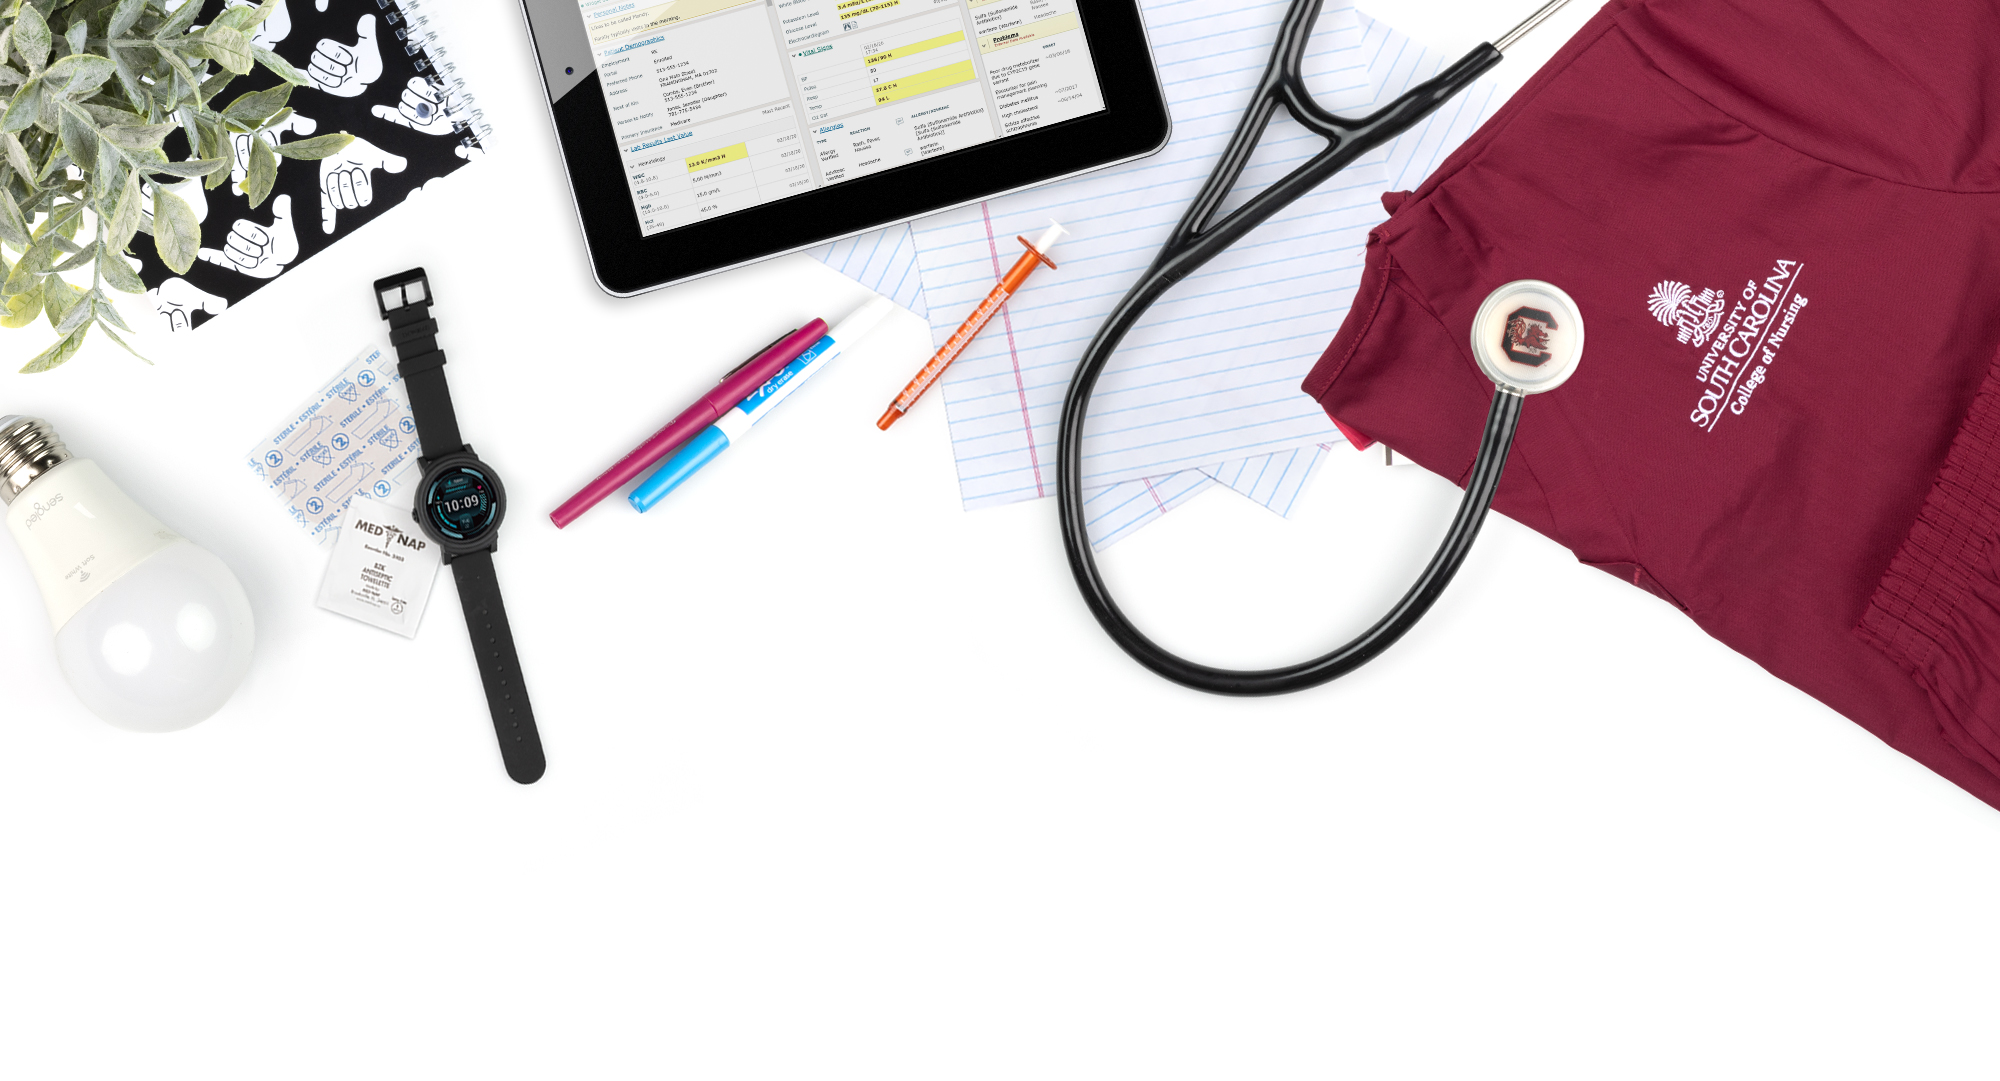 Various items representing the College of Nursing on a white background.